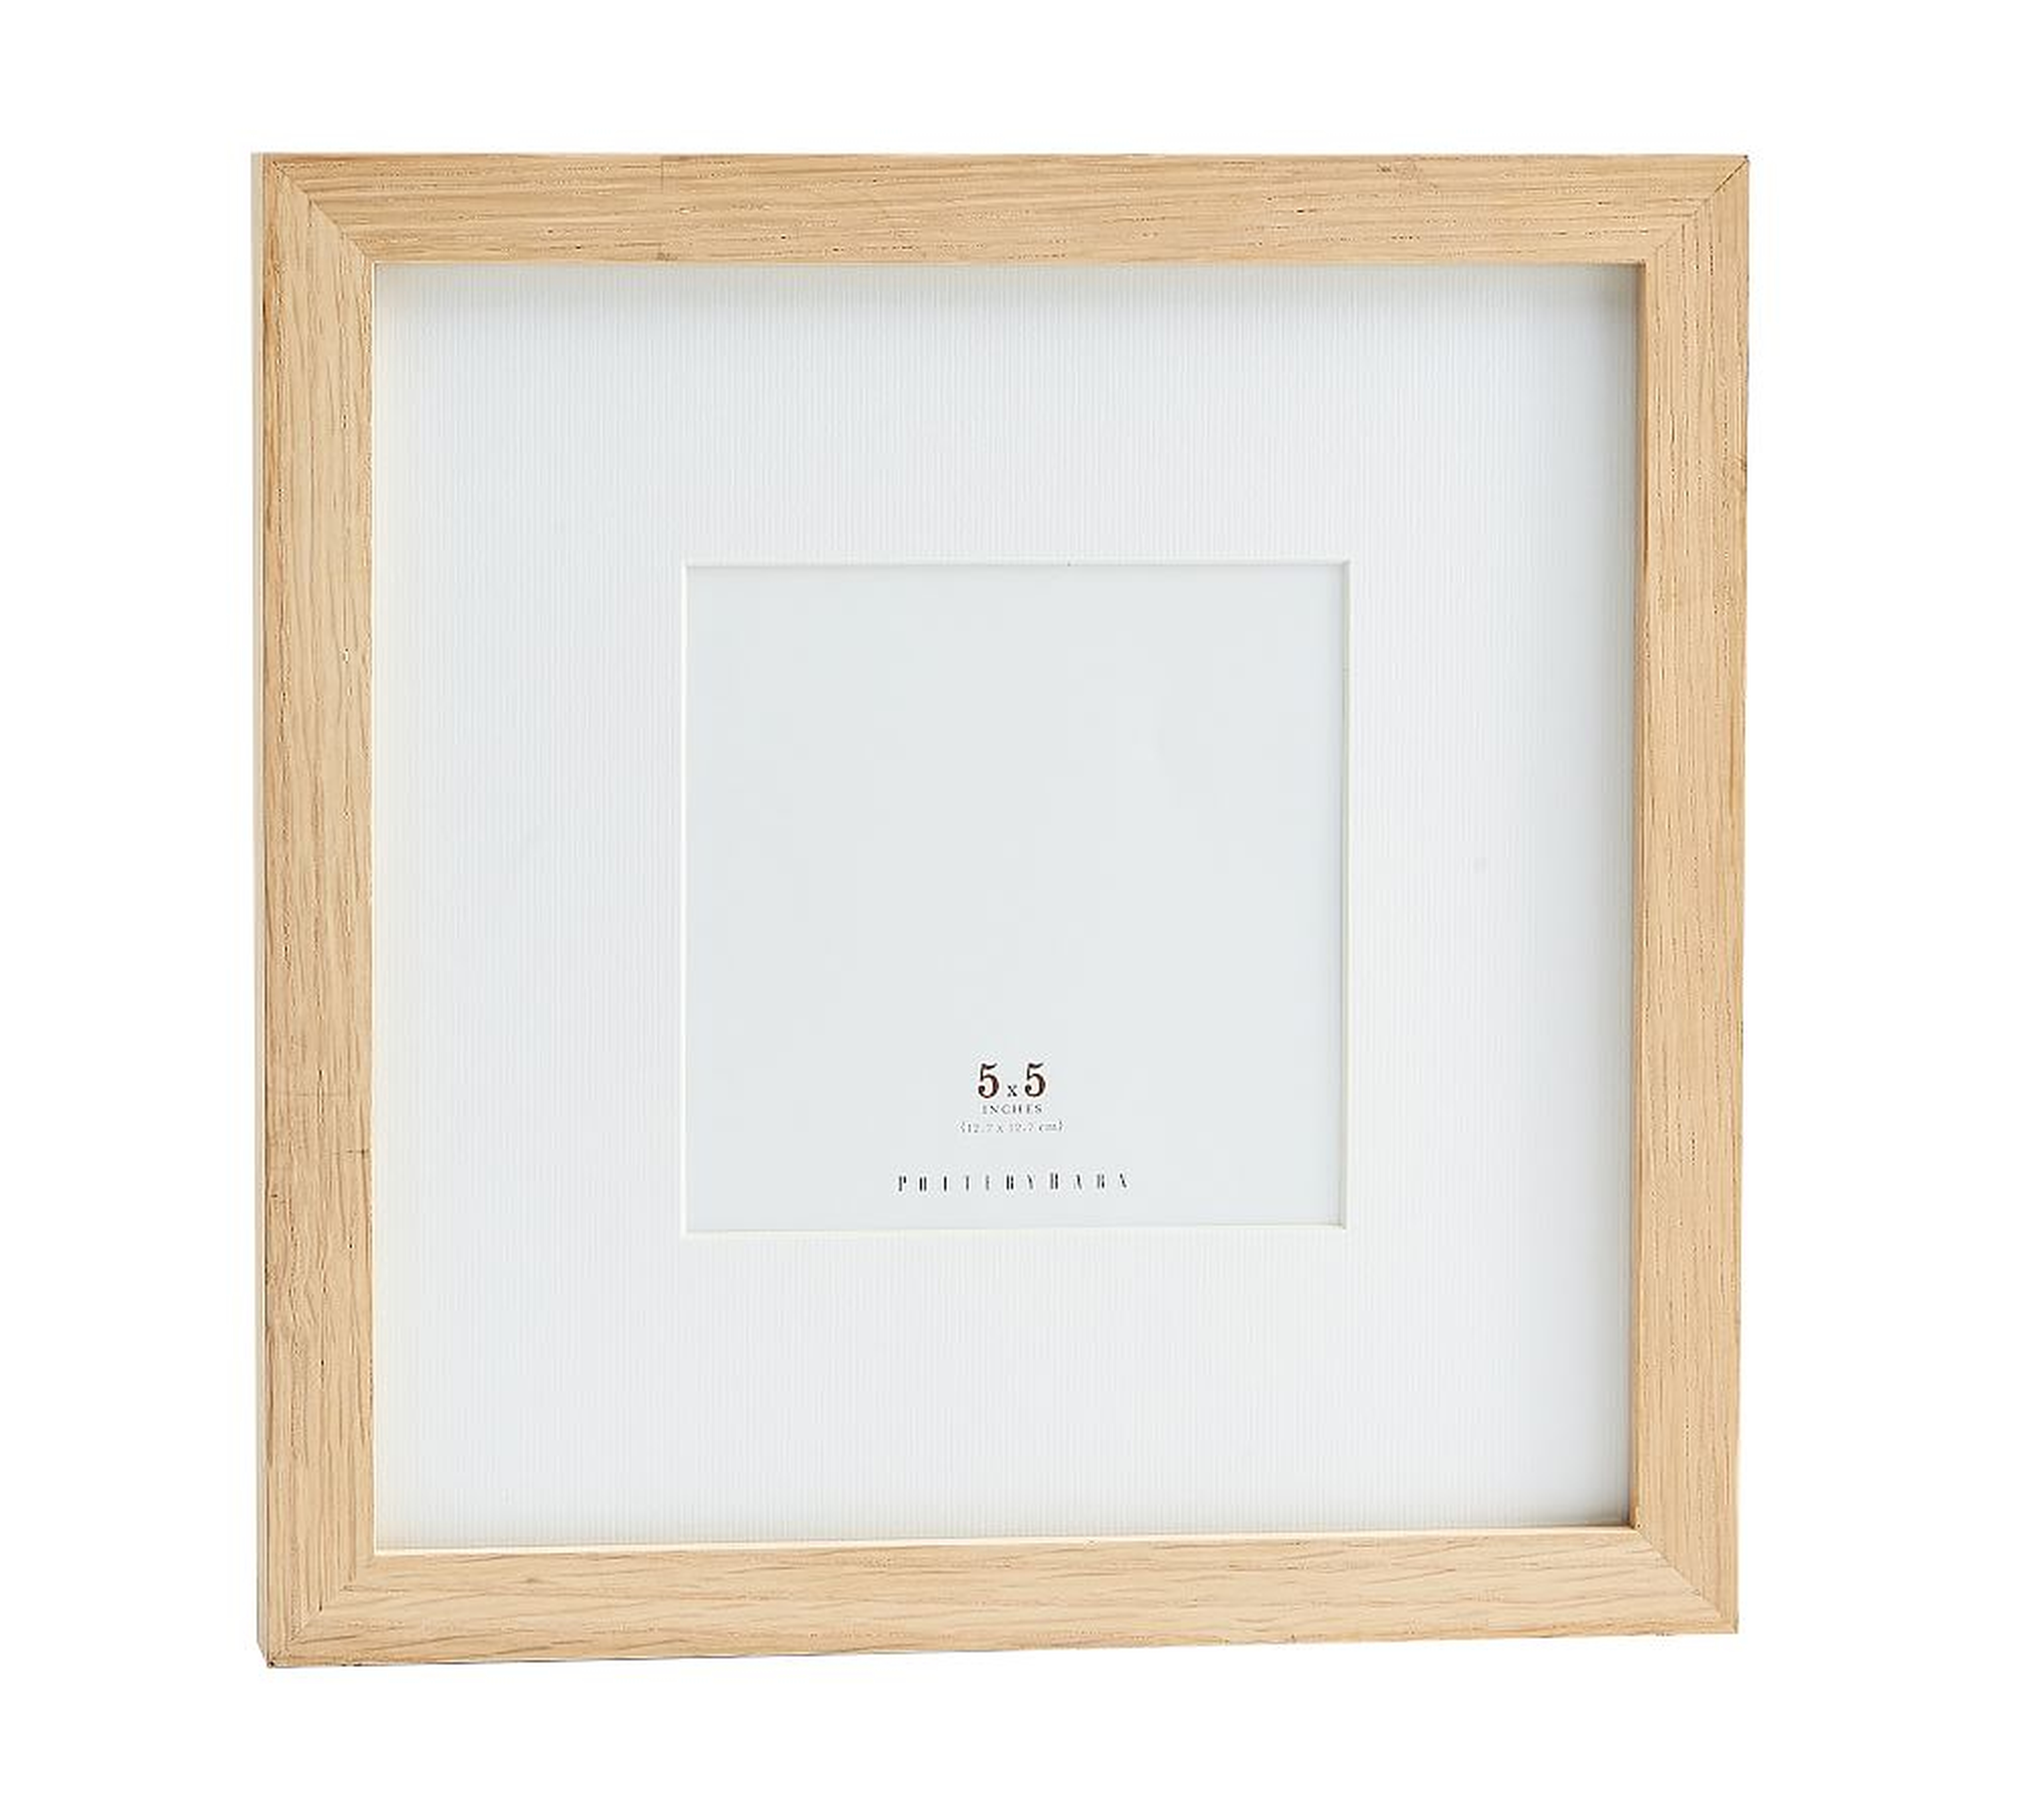 Wood Gallery Single Opening Frame - 5x5 (10x10 Without Mat) - Natural - Pottery Barn